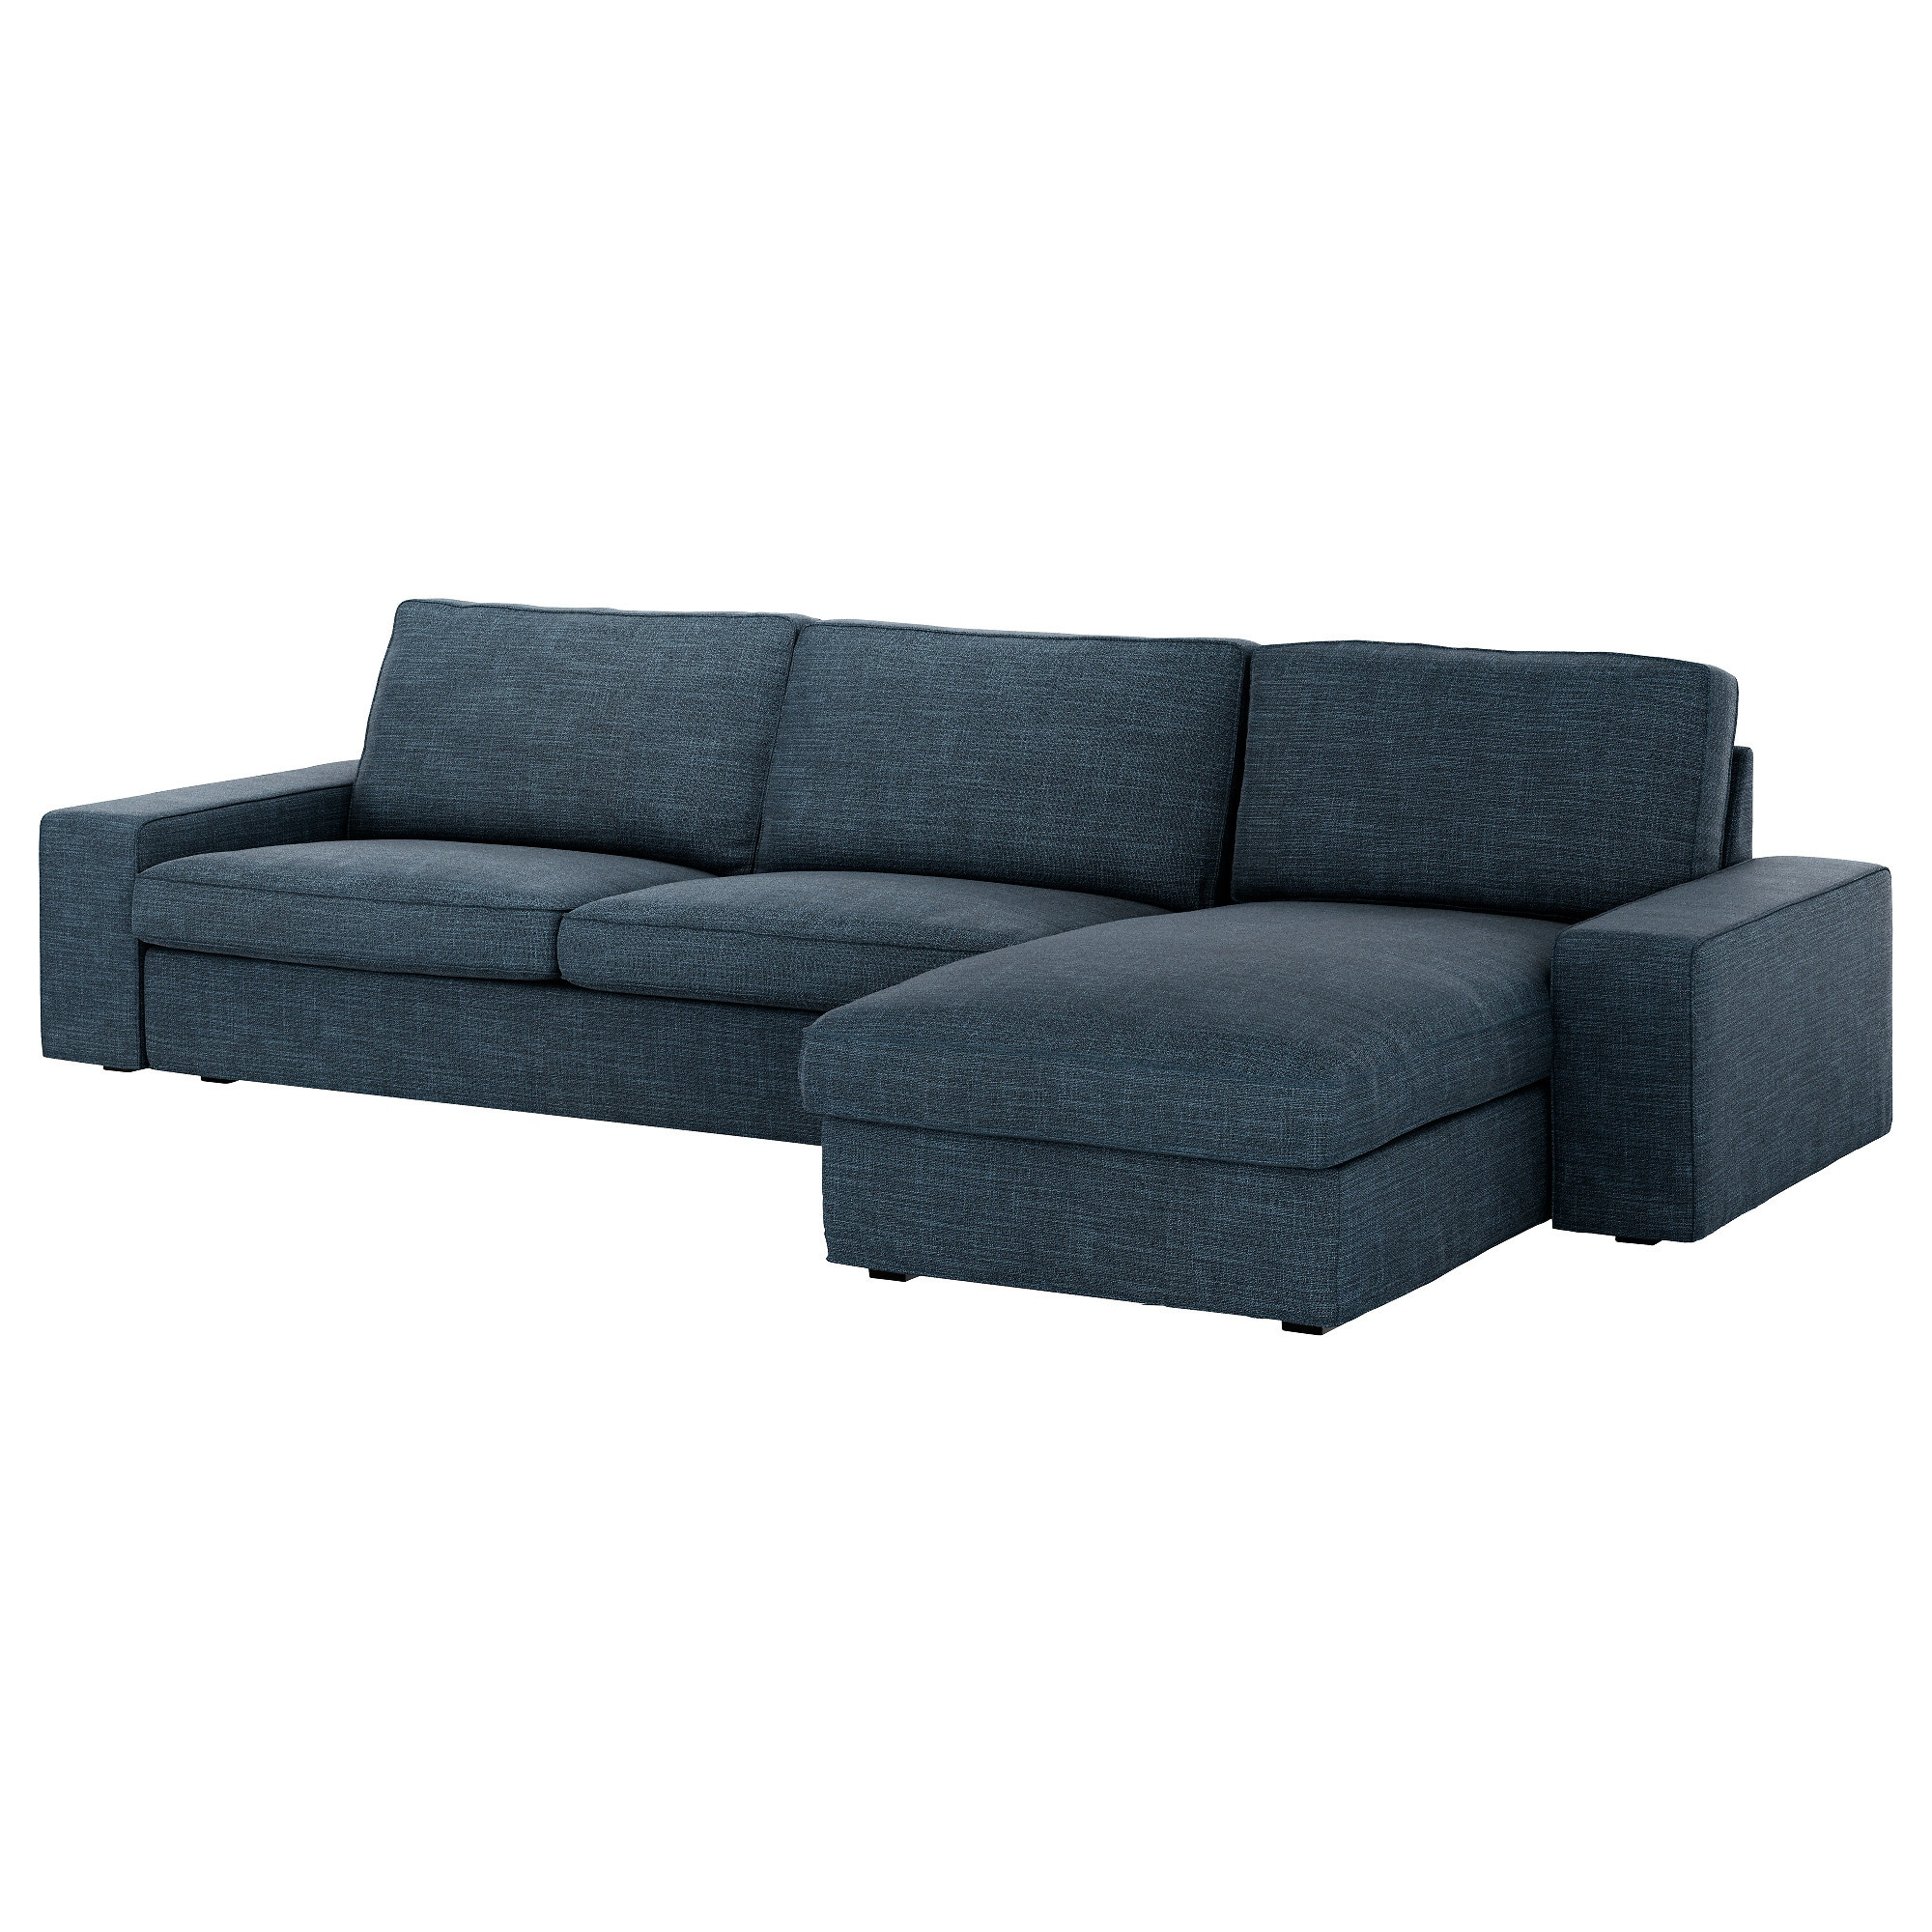 Best ideas about 4 Seat Sofa
. Save or Pin KIVIK 4 seat sofa With chaise longue hillared dark blue IKEA Now.